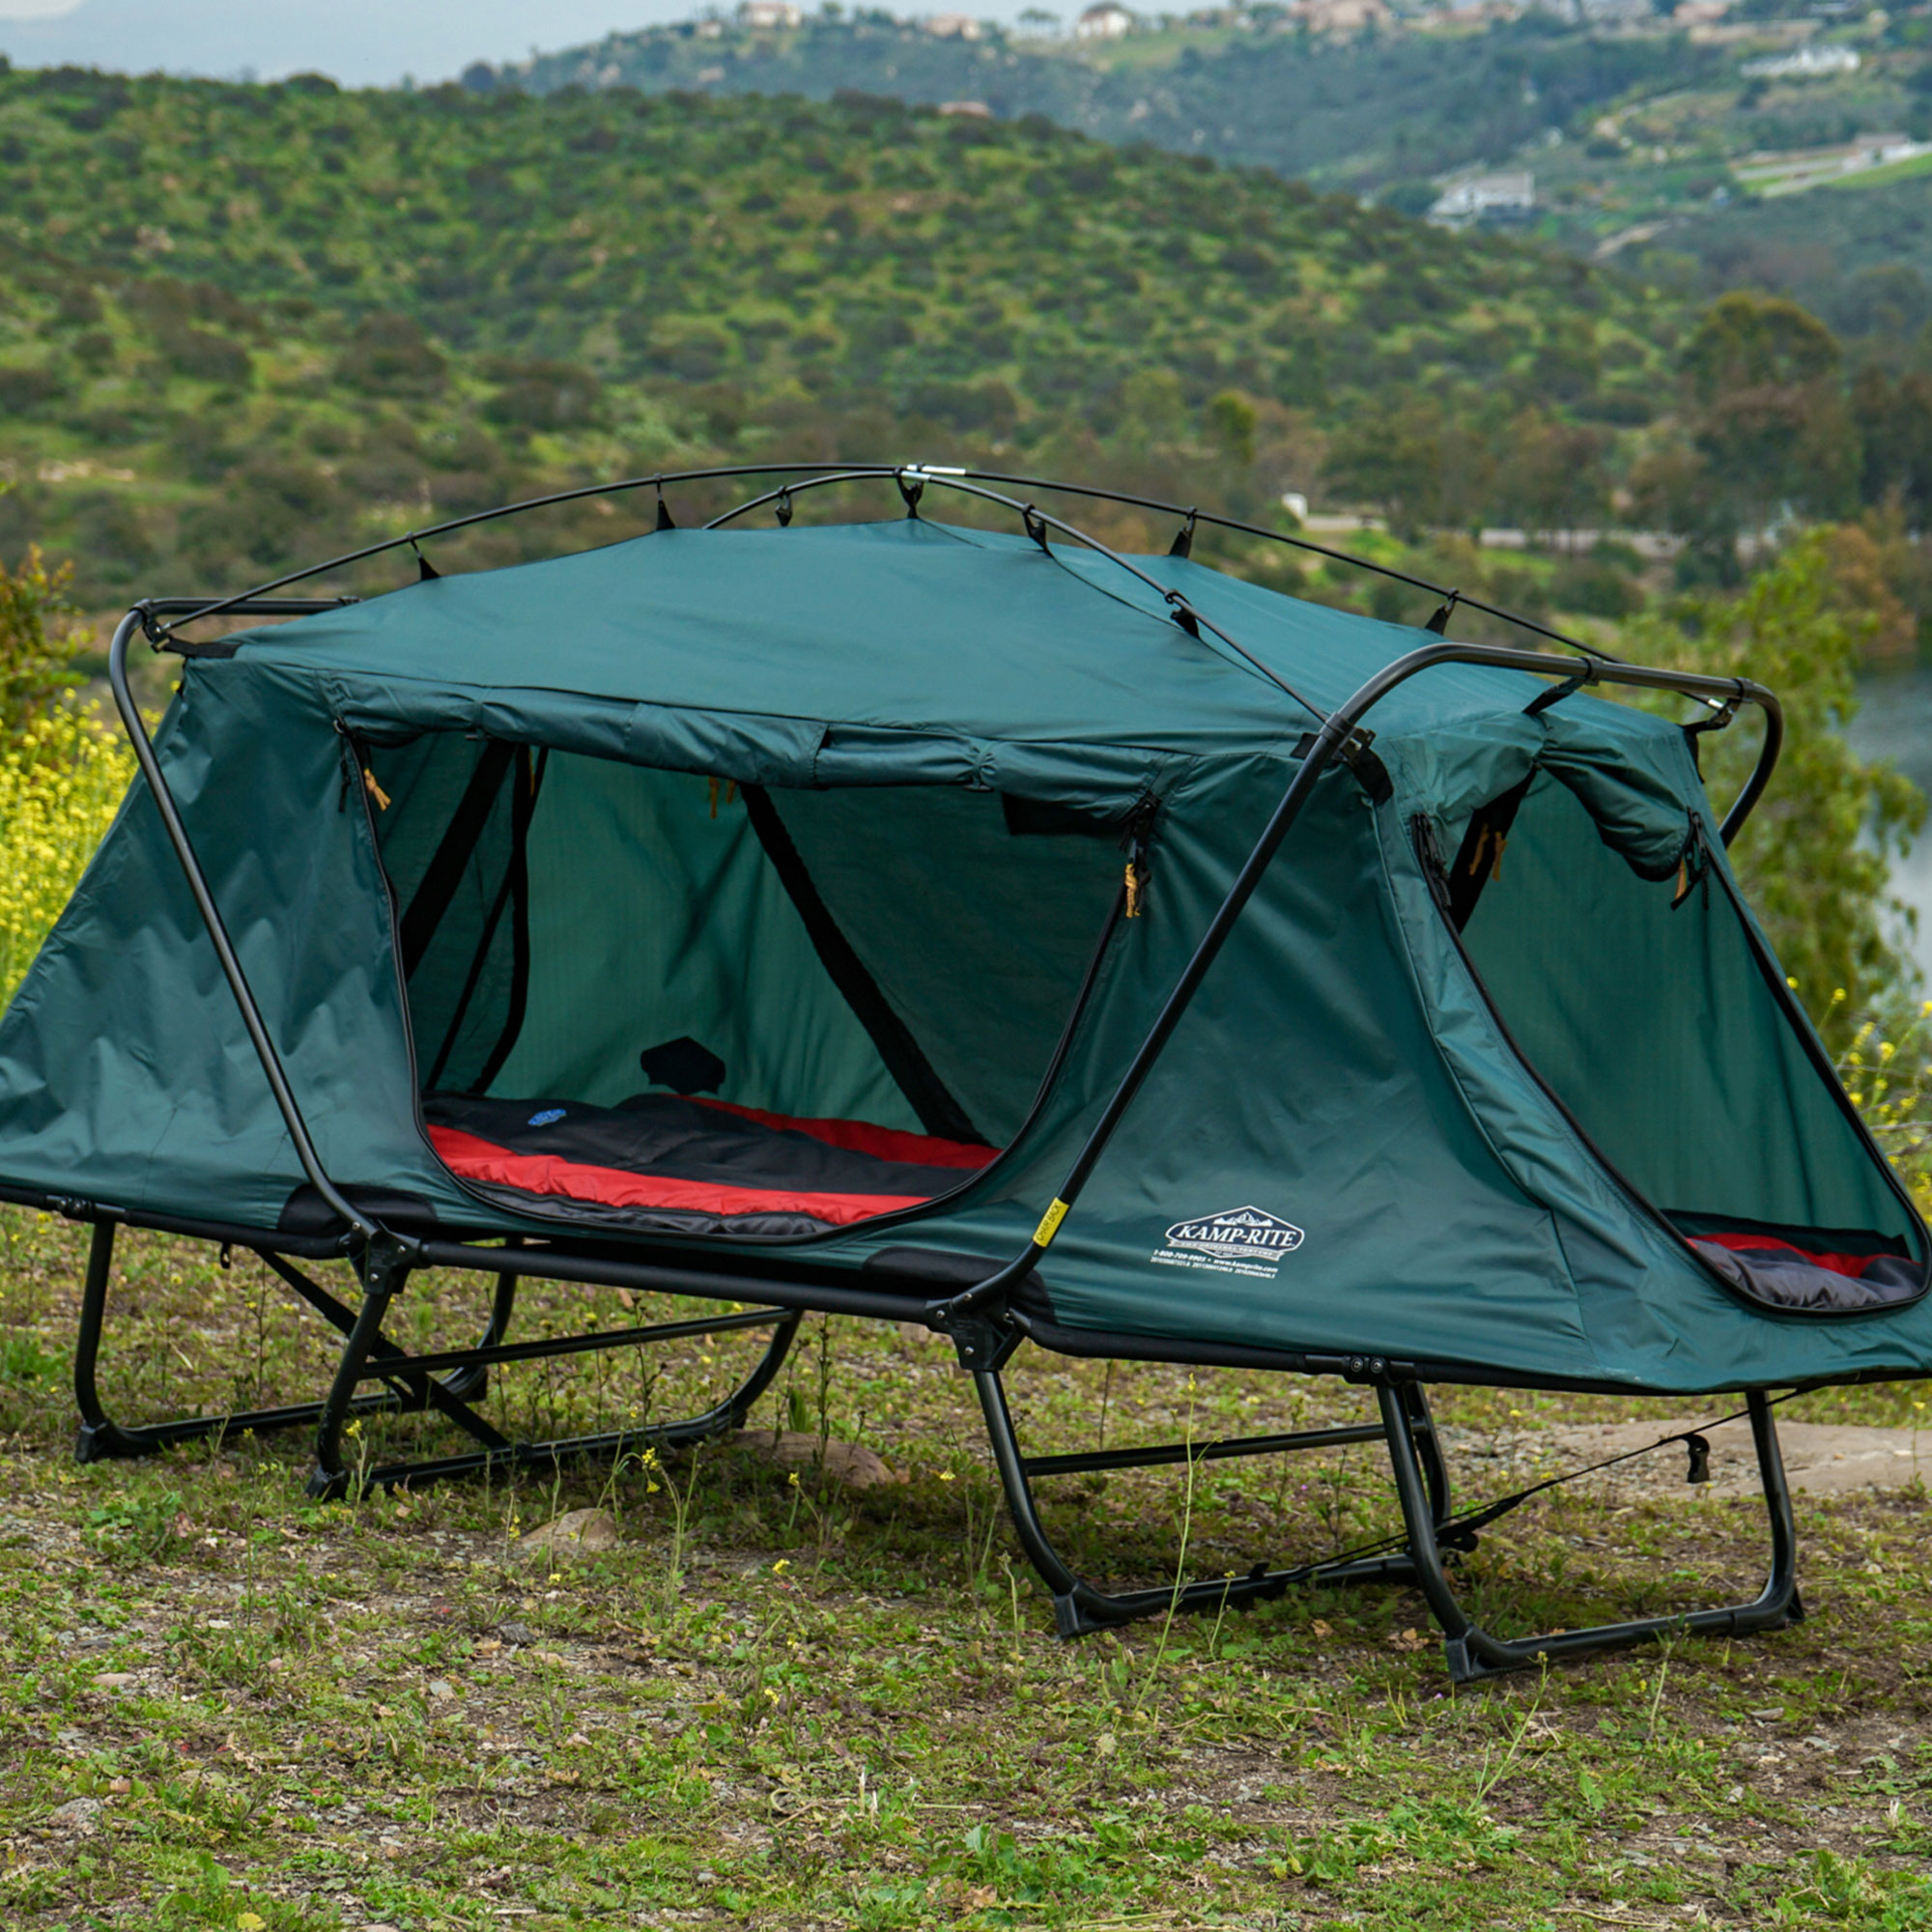 Kamp-Rite Oversized Quick Setup 1 Person Cot, Chair, & Tent w/Domed Top - image 3 of 8